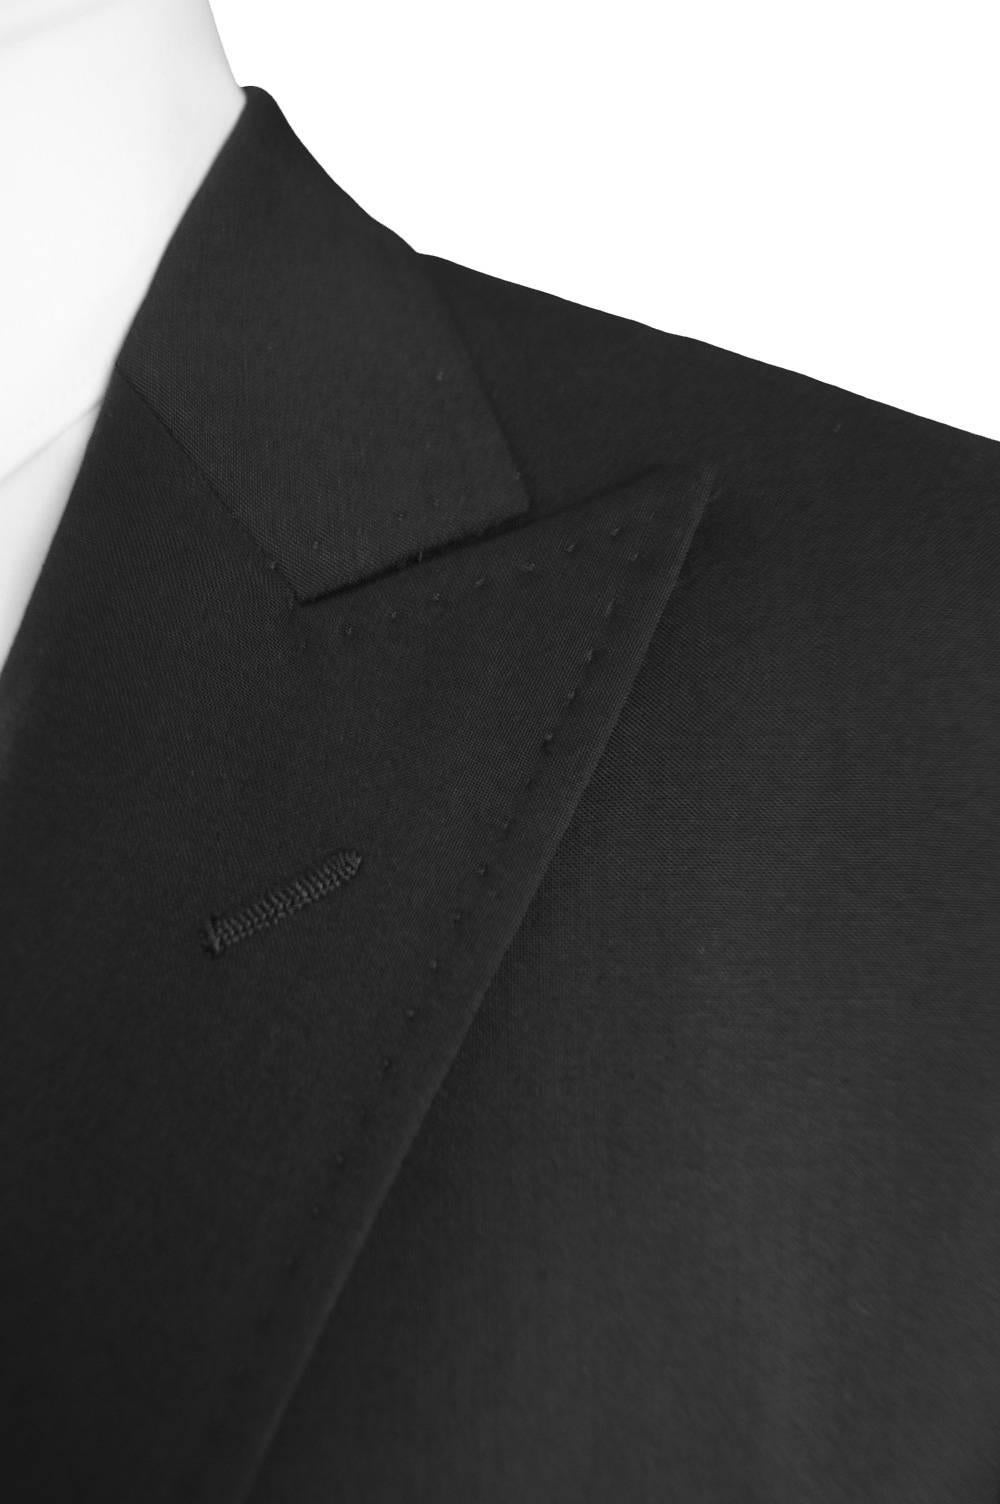 Dolce & Gabbana Men's Classic Peaked Lapels Dinner Jacket, c. Fall 2005 In Excellent Condition For Sale In Doncaster, South Yorkshire